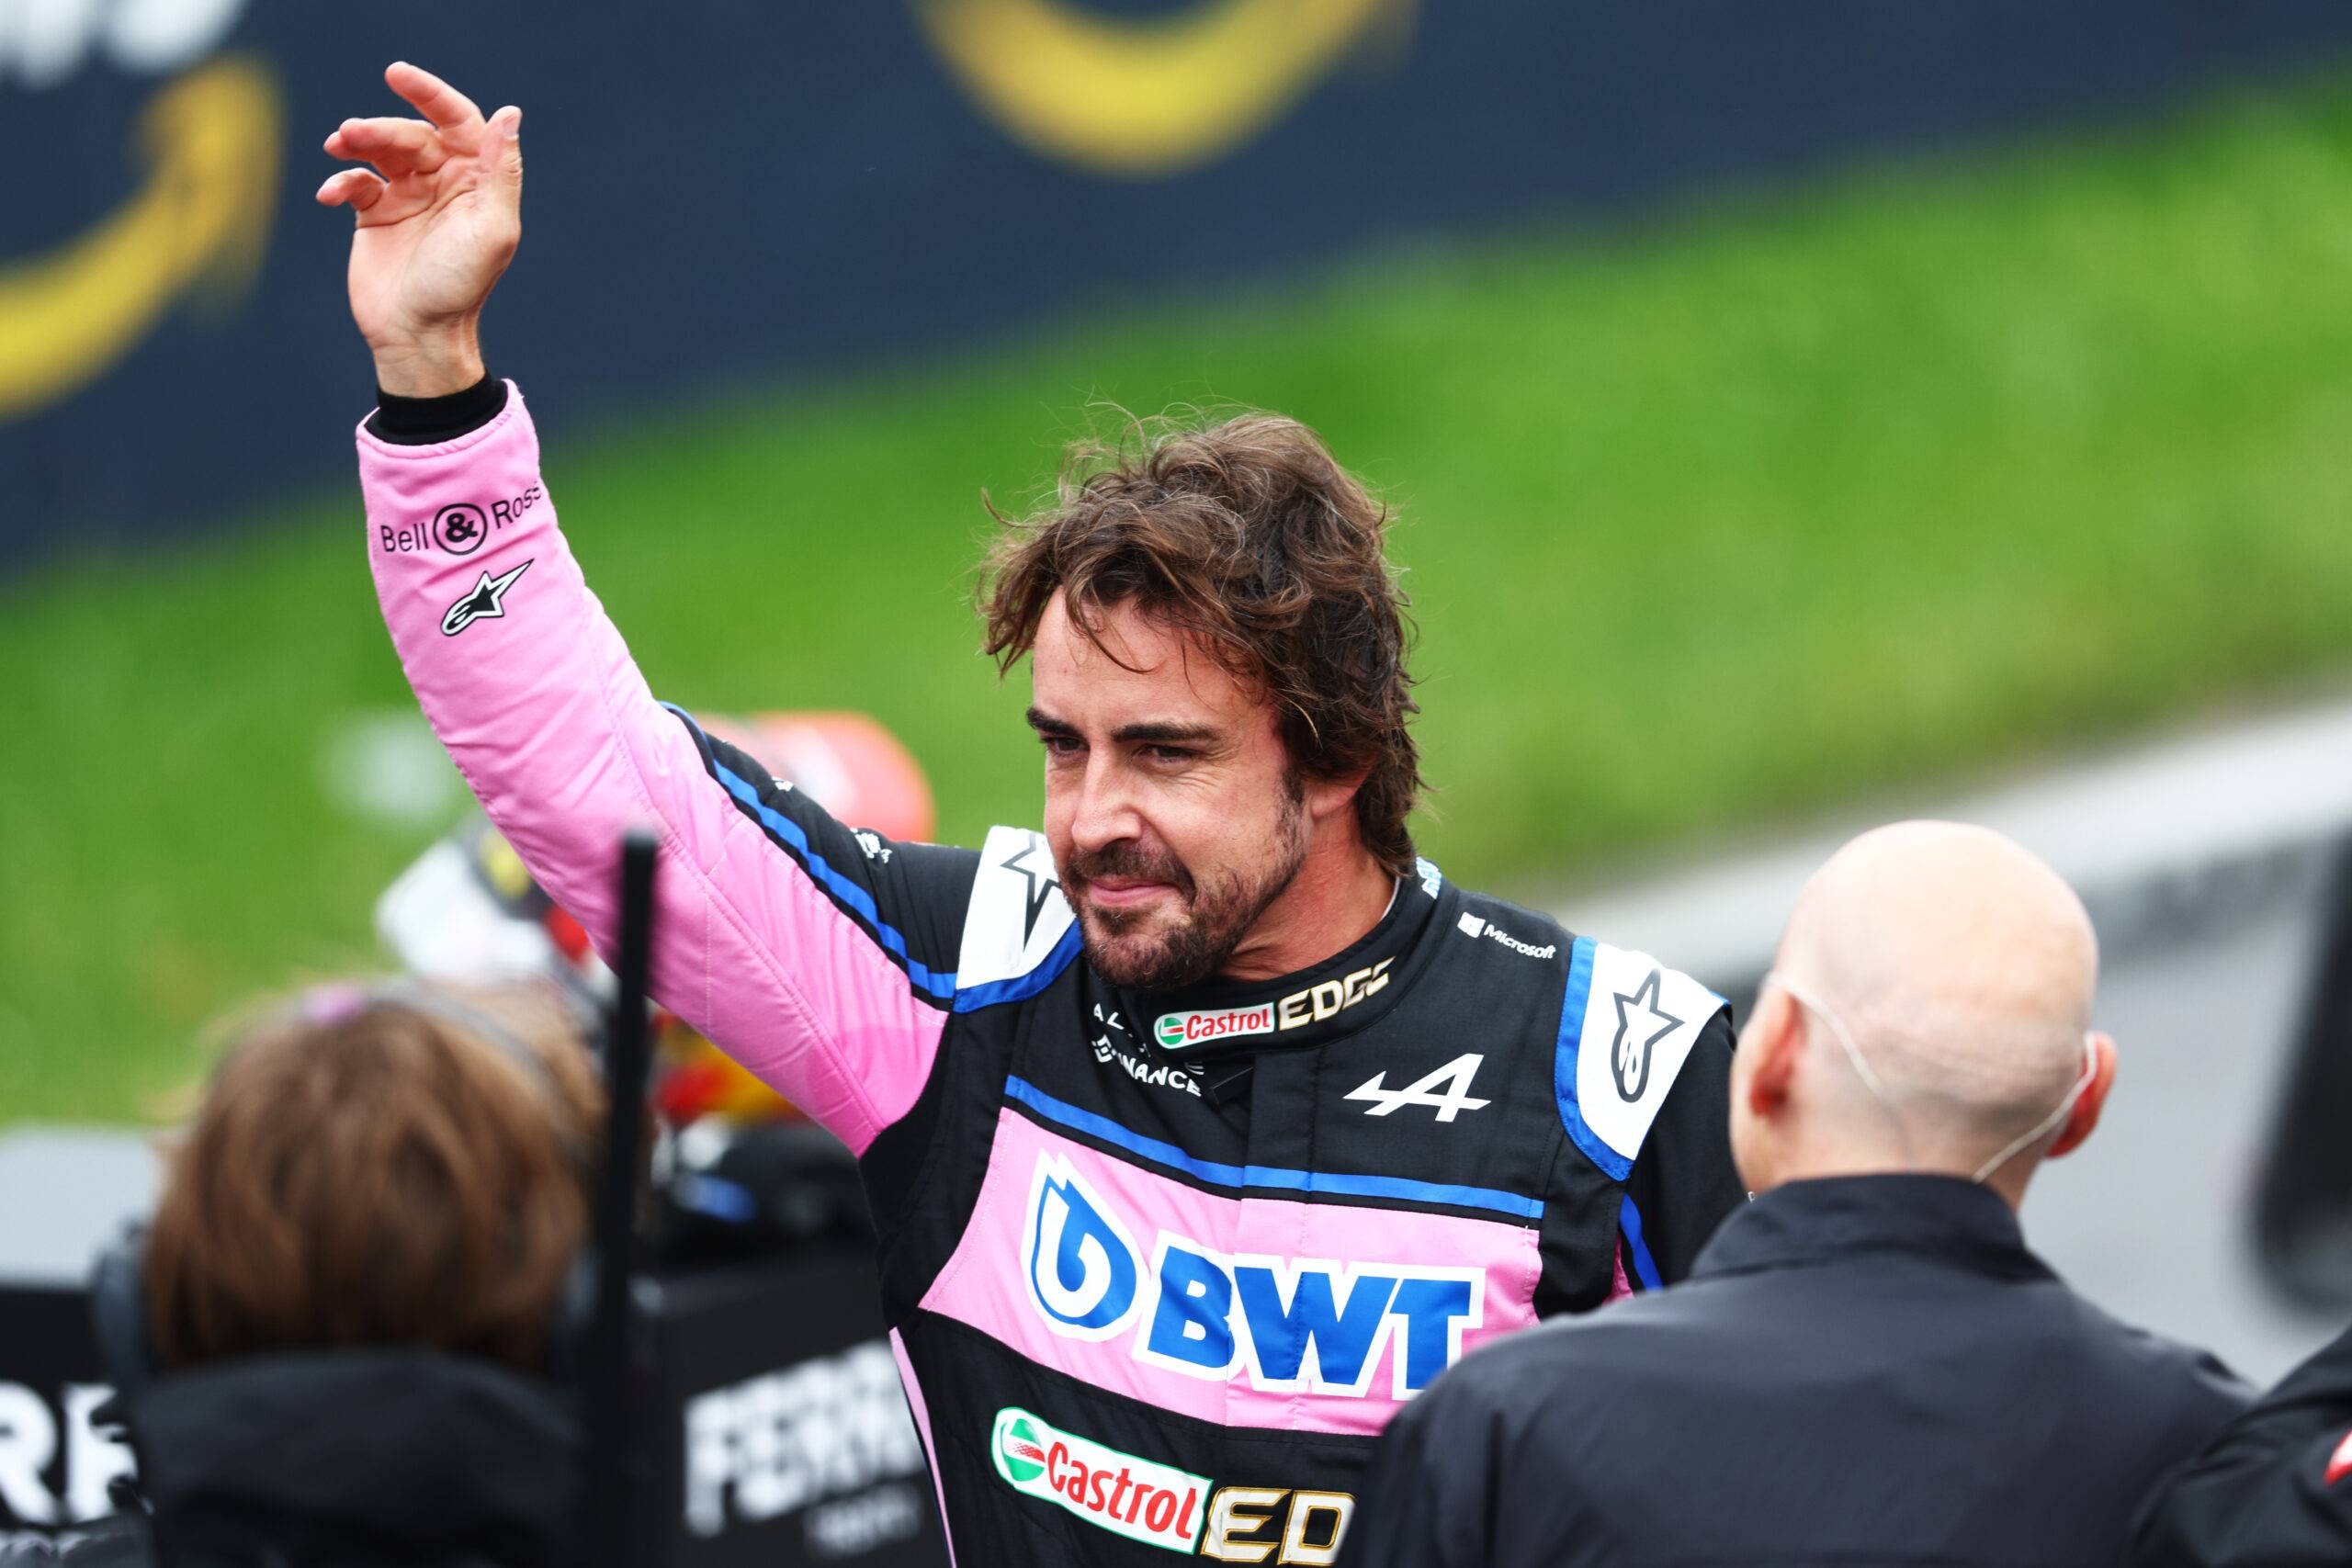 Fernando Alonso waves after qualifying at the Canadian GP